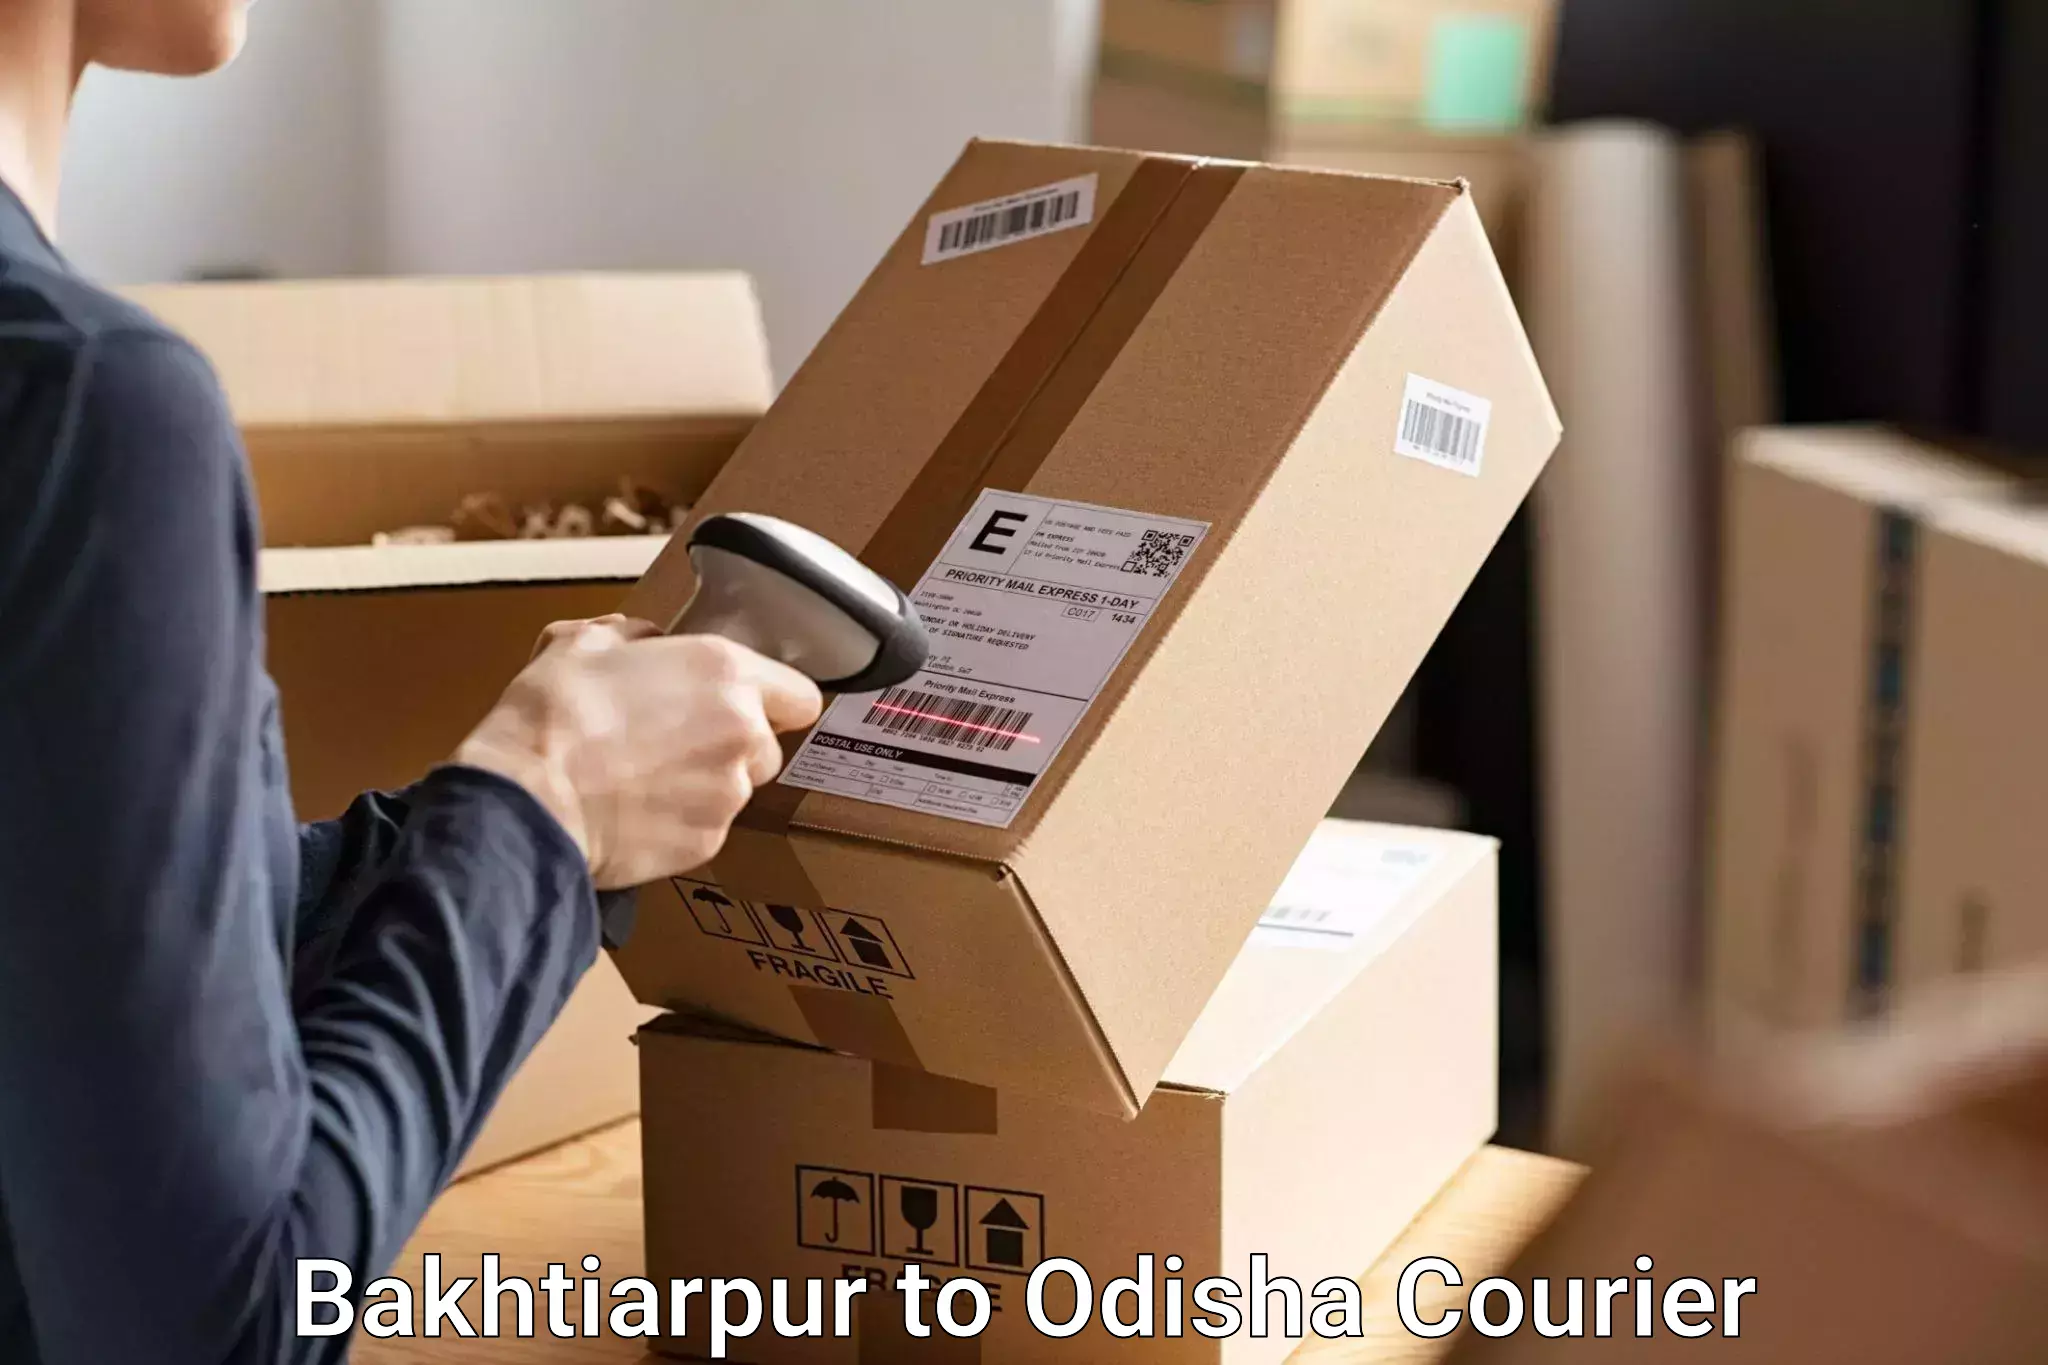 Luggage delivery logistics in Bakhtiarpur to Mathili